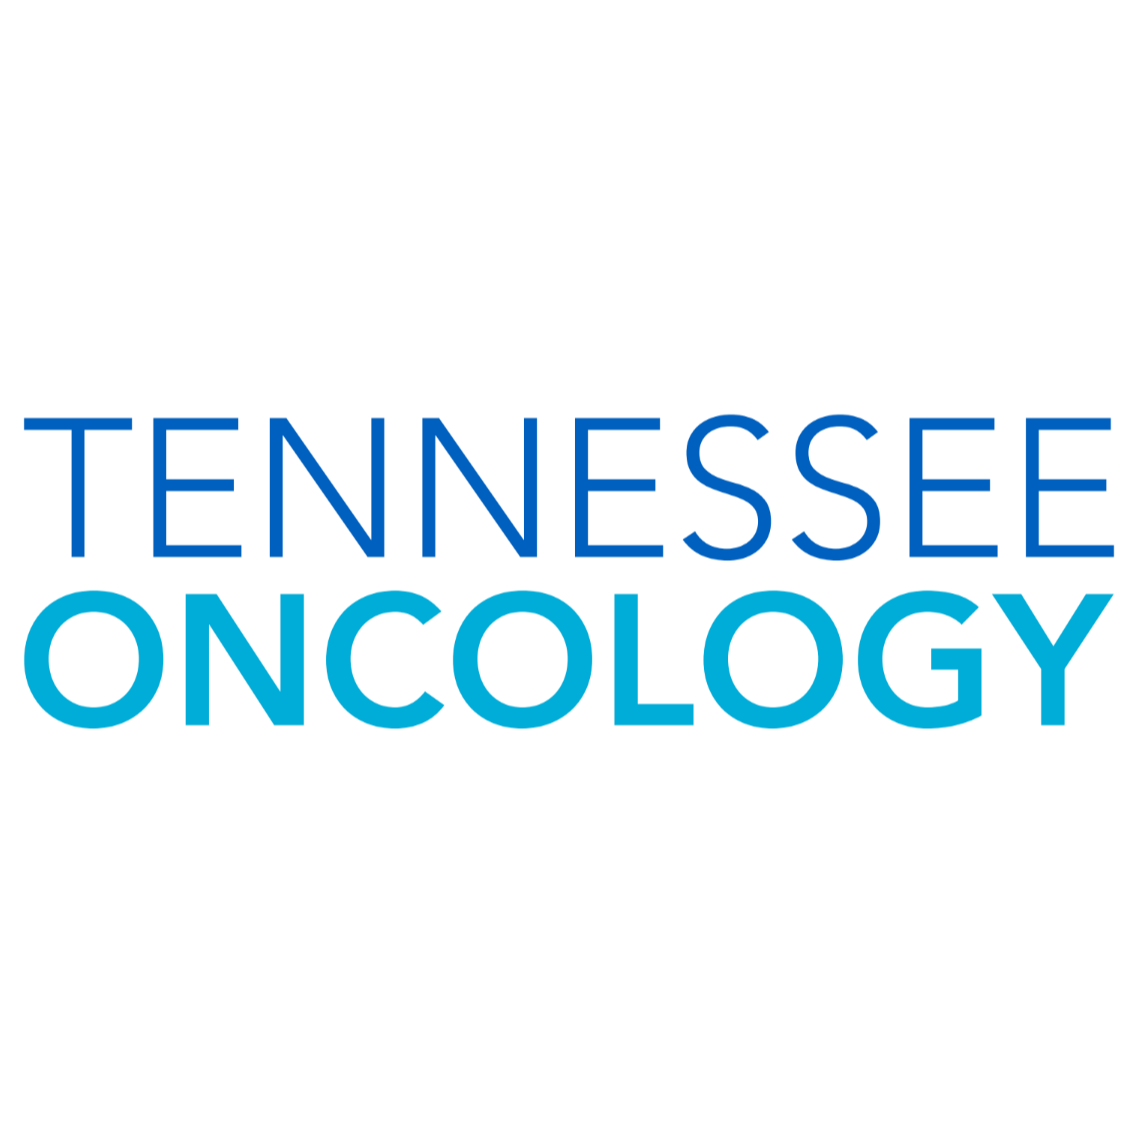 Tennessee Oncology - McMinnville - McMinnville, TN 37110 - (931)815-0032 | ShowMeLocal.com